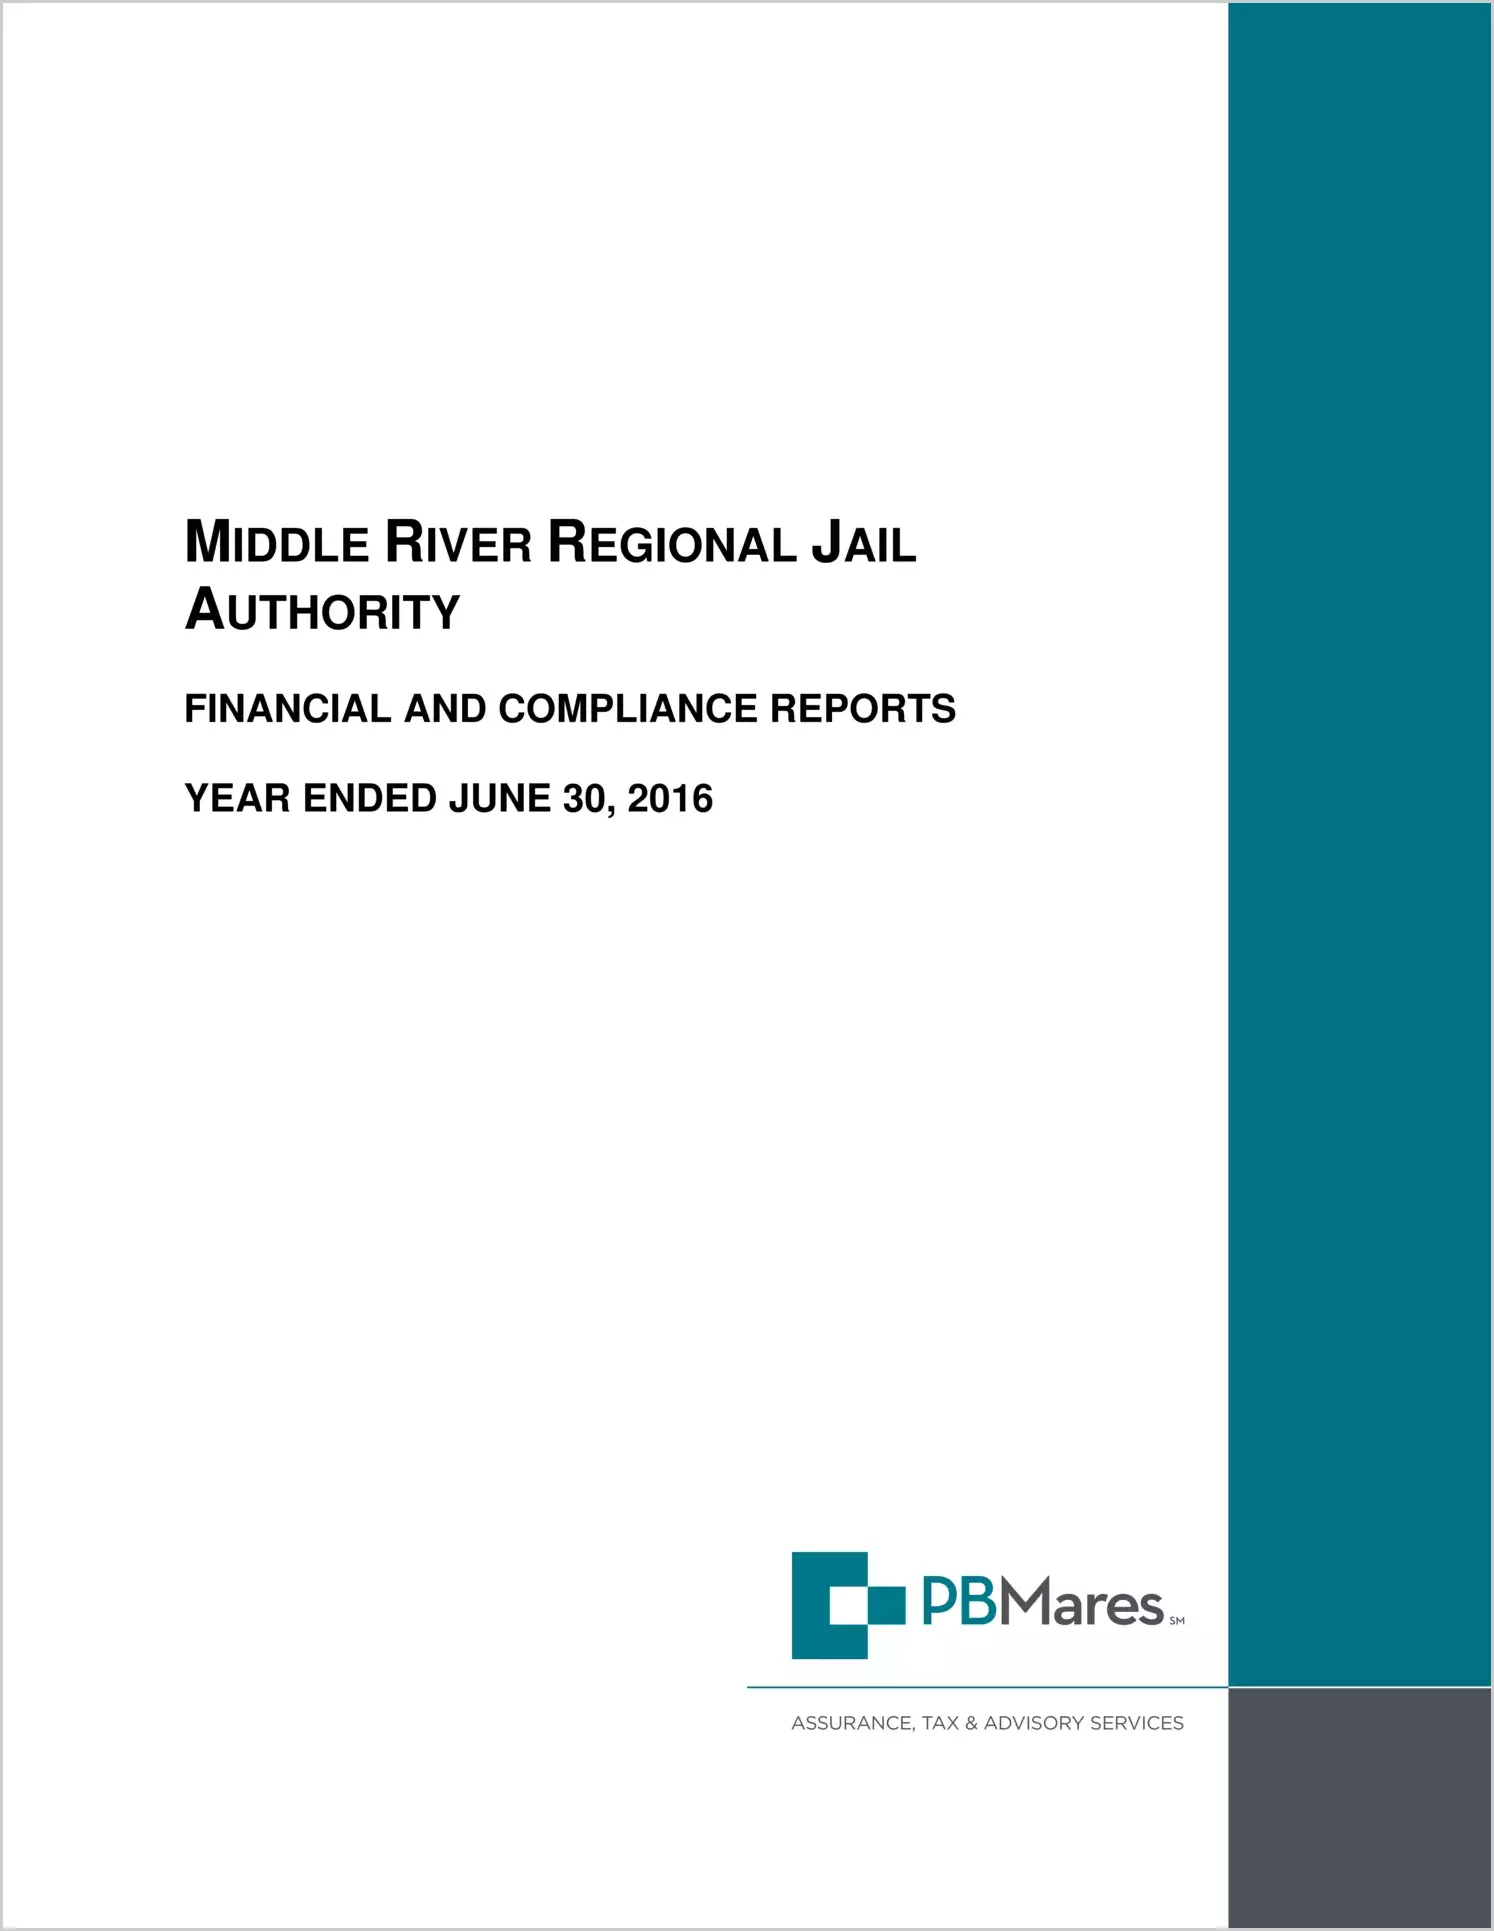 2016 ABC/Other Annual Financial Report  for Middle River Regional Jail Authority